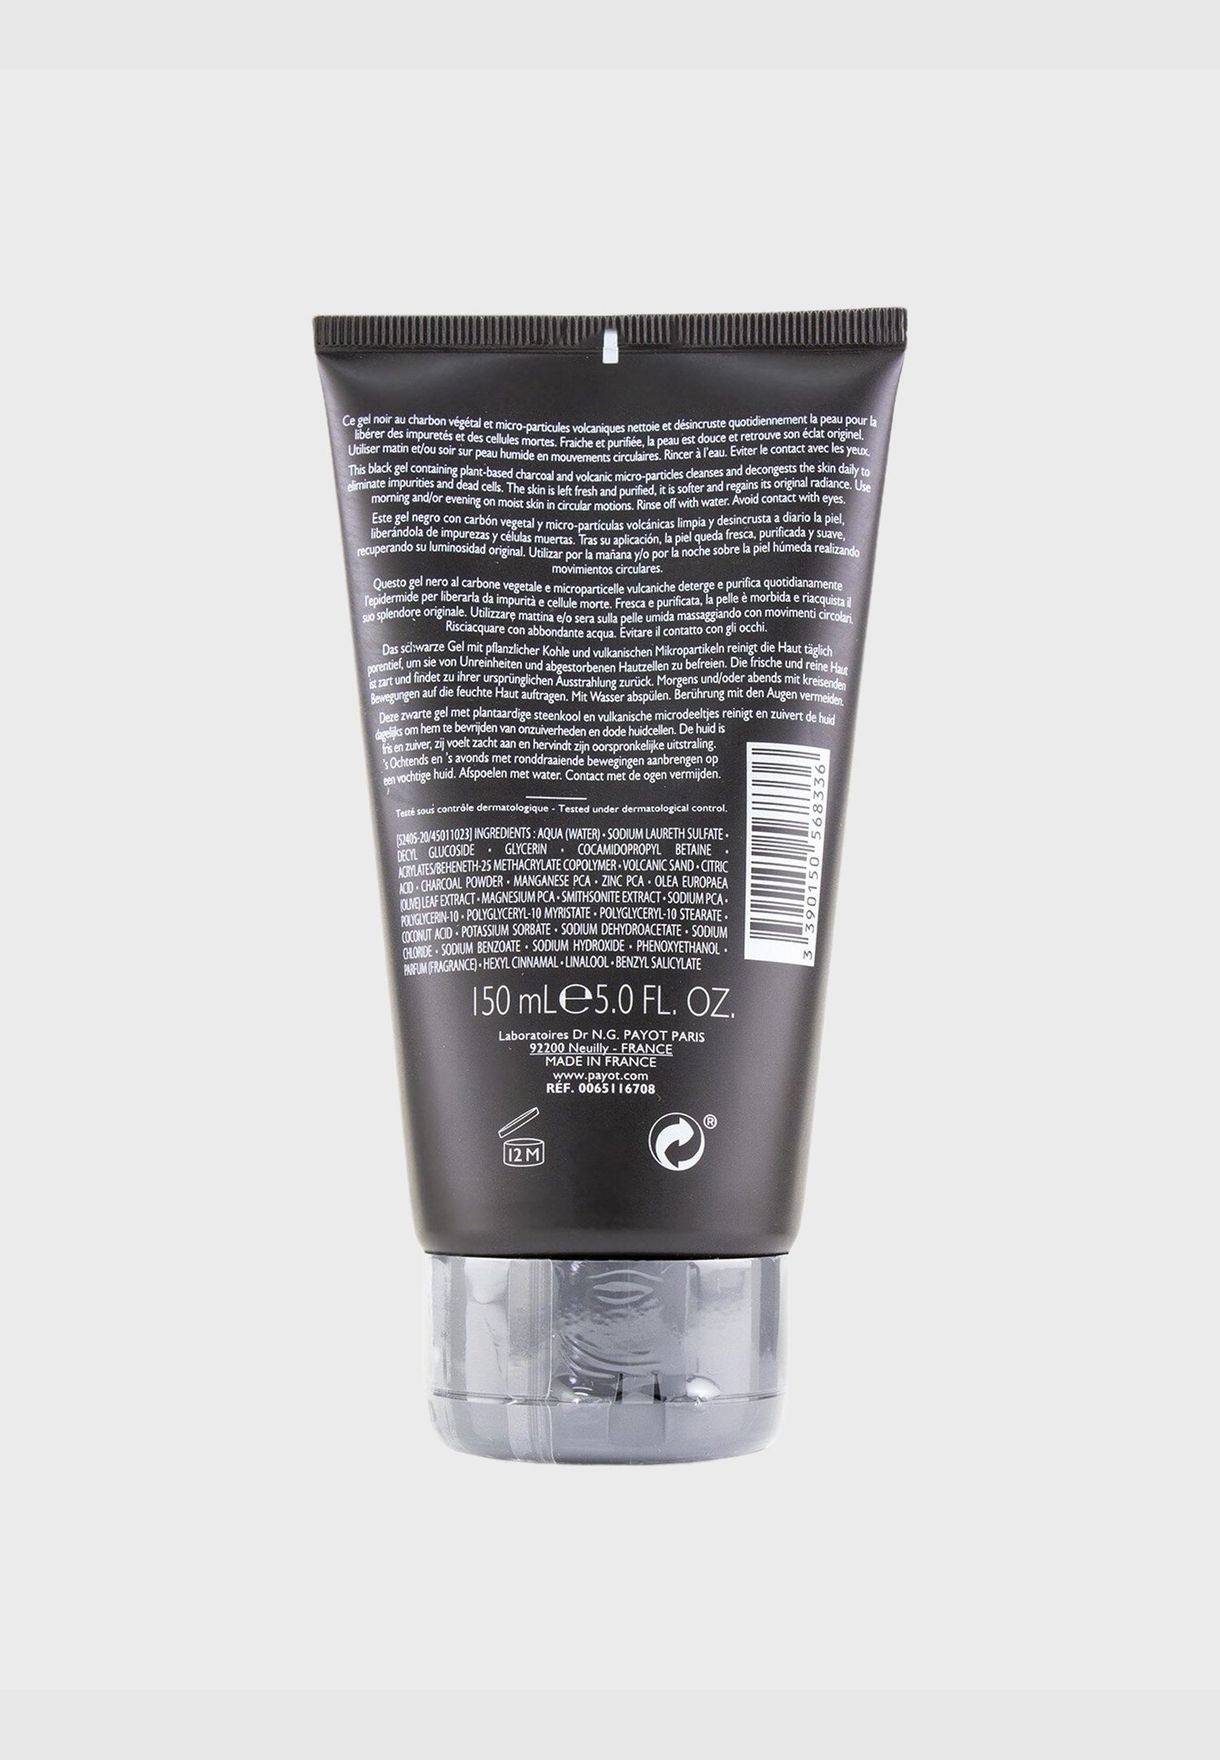 Optimale Homme Anti-Imperfections Facial Cleanser